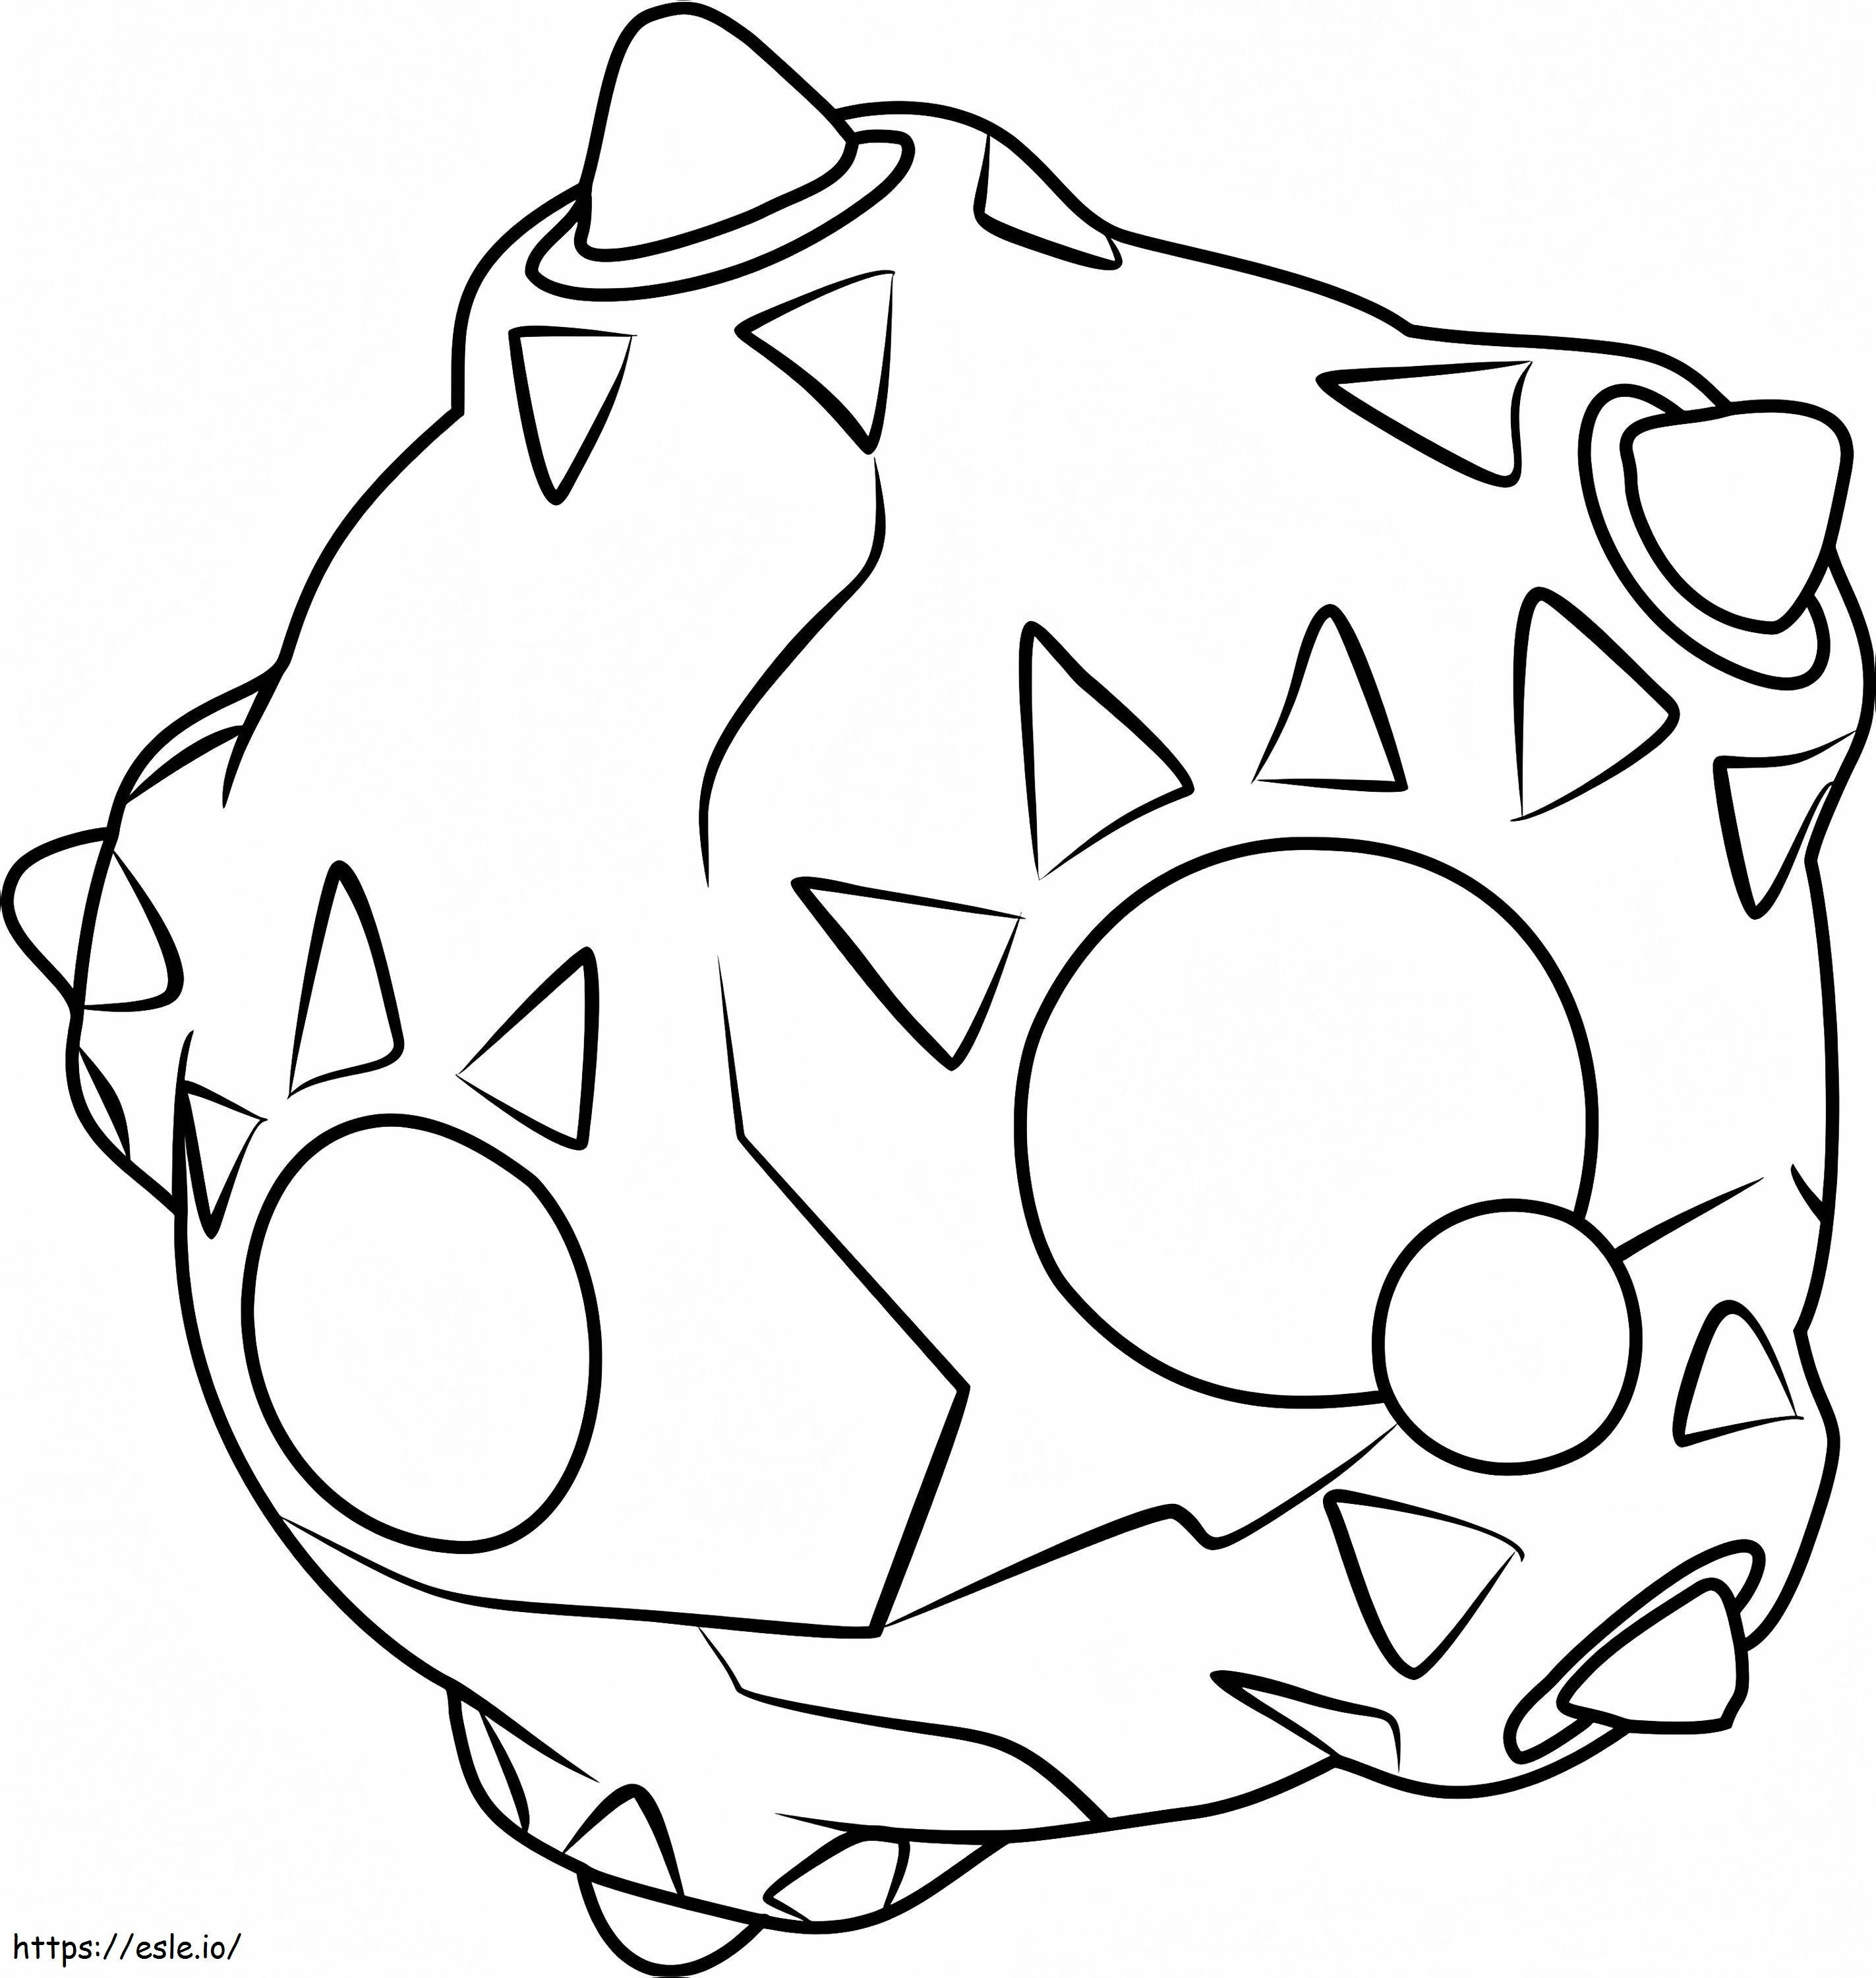 1529897004 16 coloring page